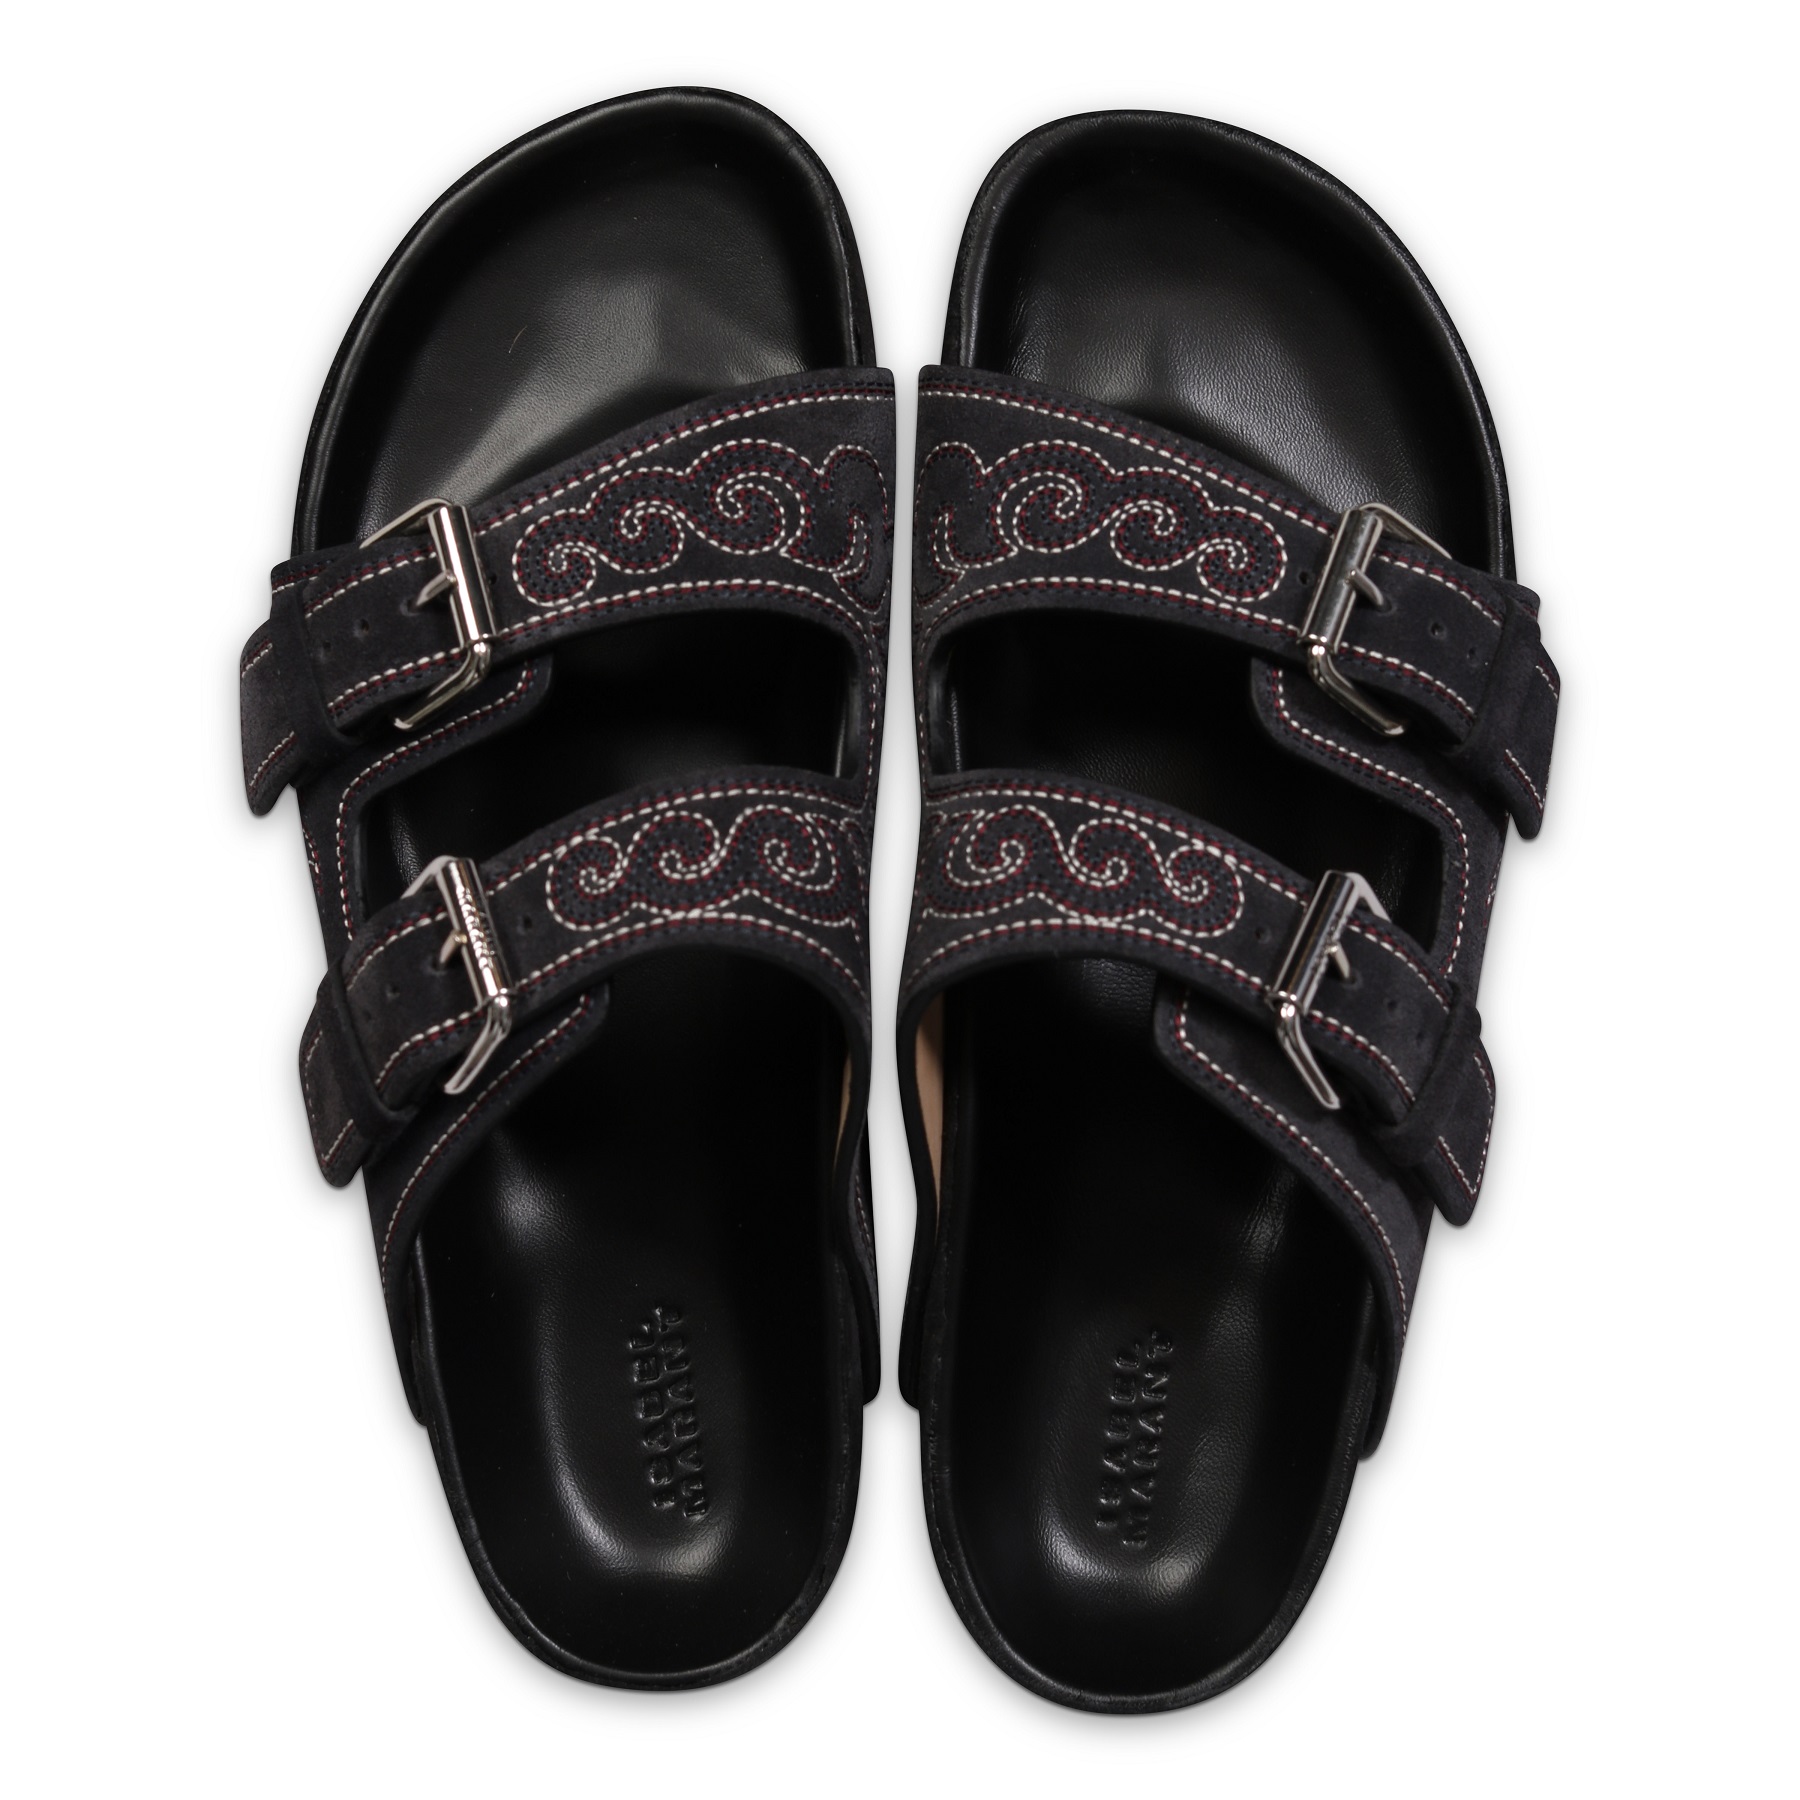 ISABEL MARANT Lennyo Sandals with Stitching in Faded Night 37